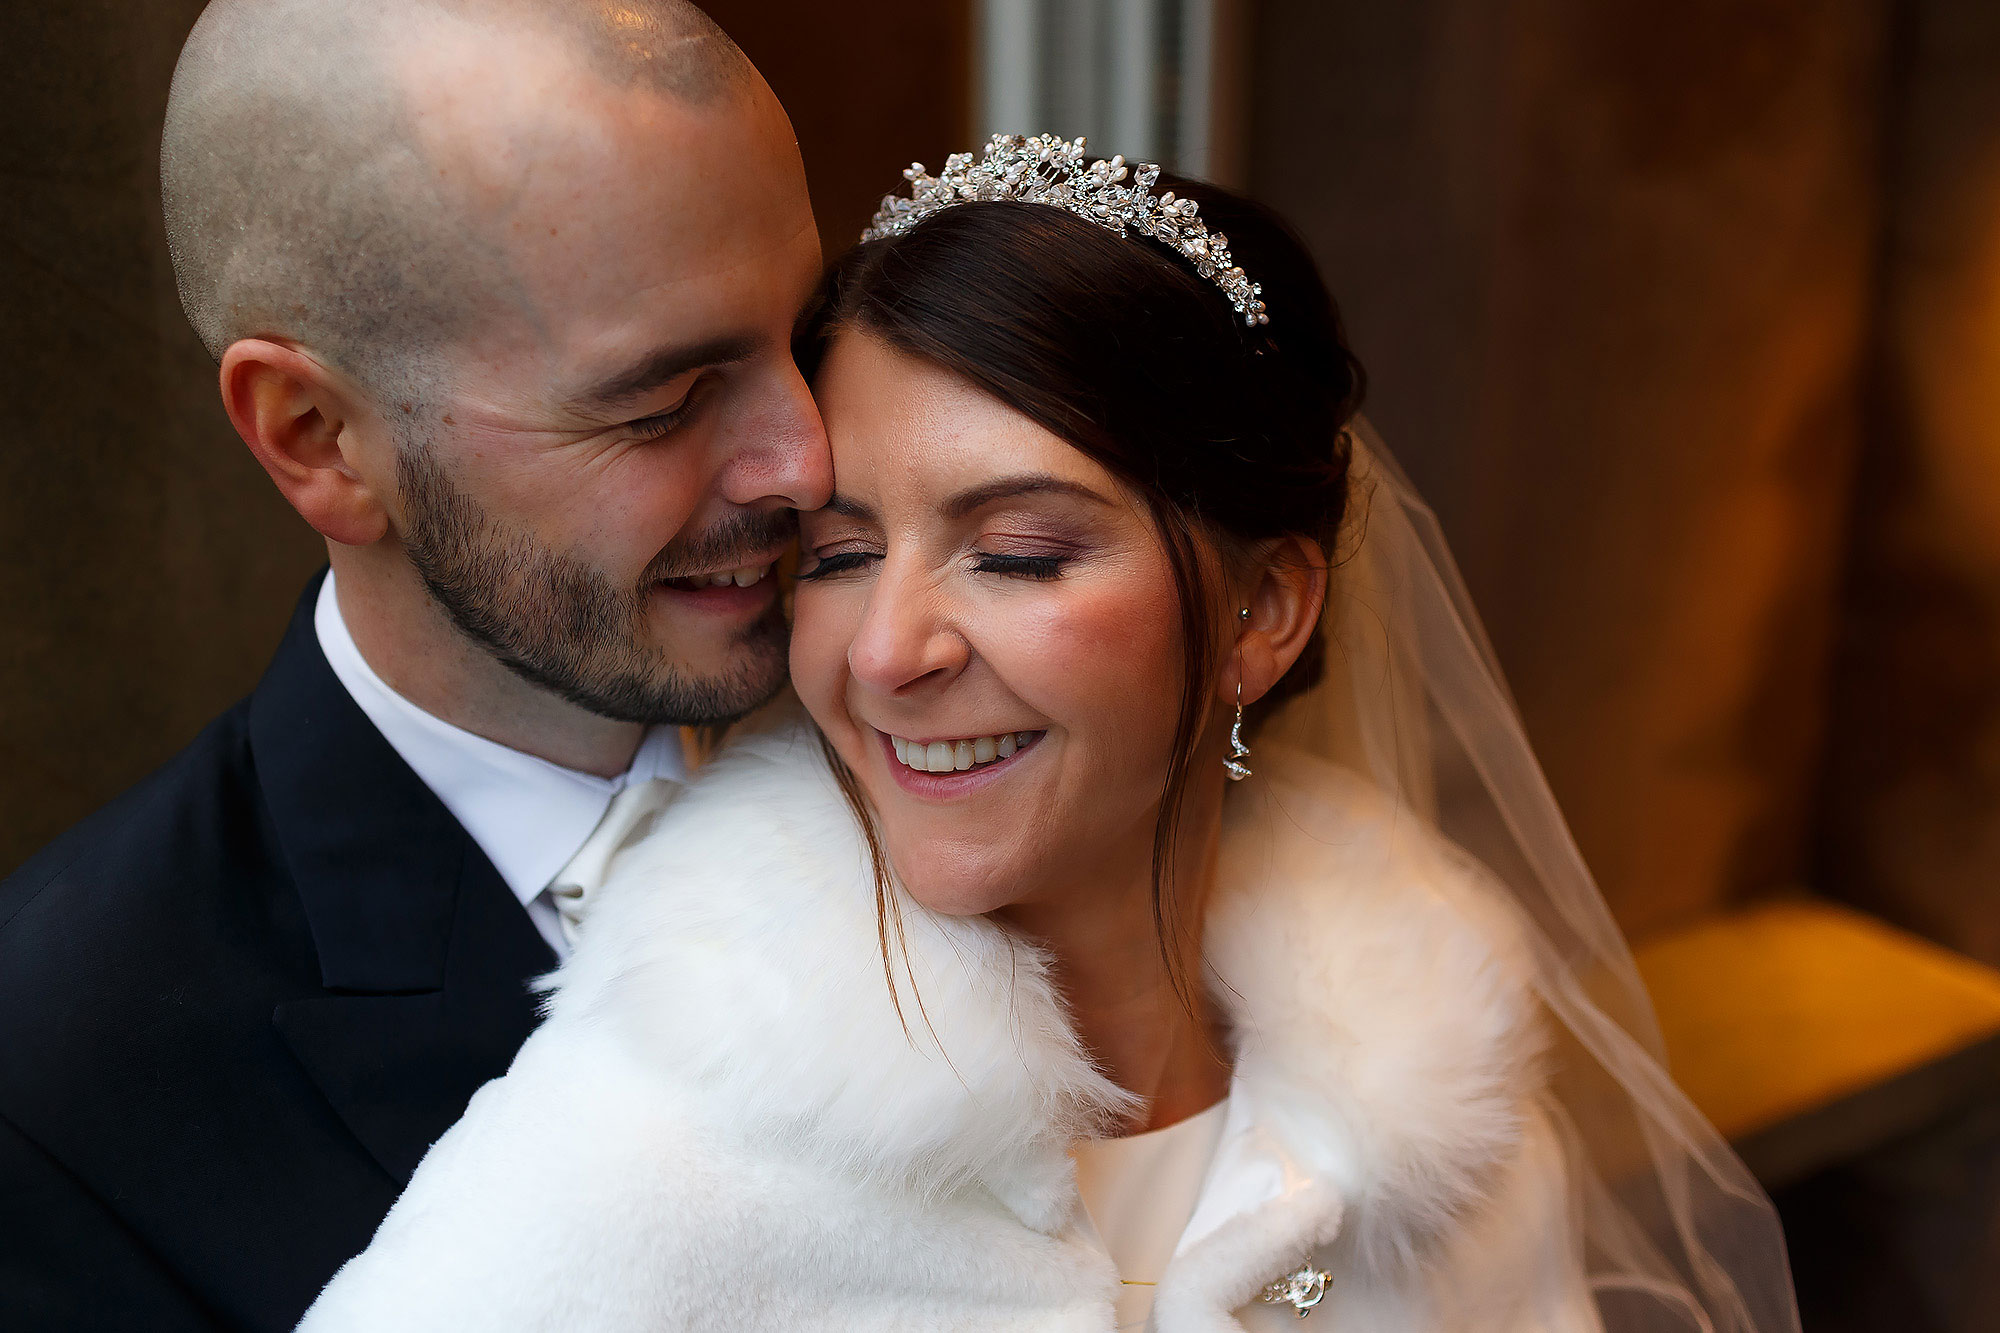 Bride wearing tiara with brown hair and fur shawl. Groom giving kisses on the cheek. In the doorway at Mitton Hall.